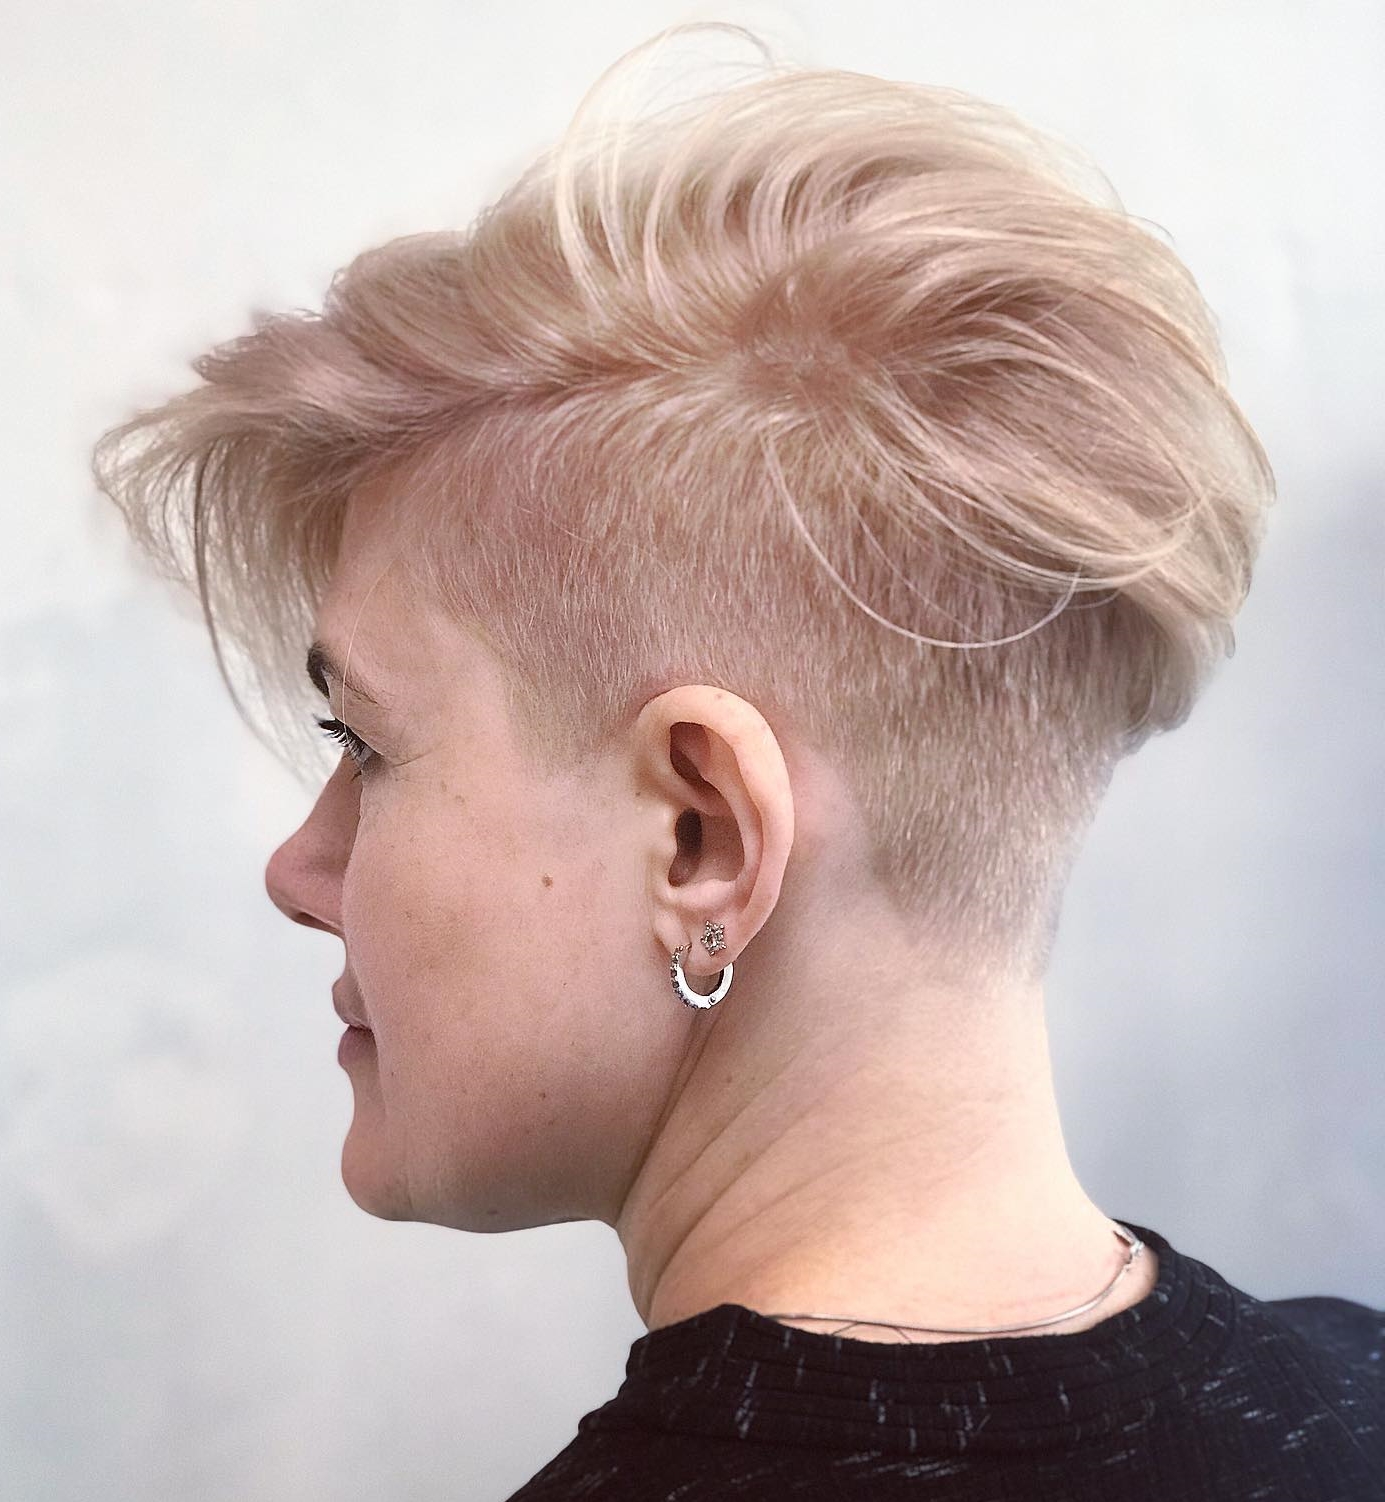 51 Edgy and Rad Short Undercut Hairstyles for Women | Short wedding hair, Undercut  hairstyles, Shaved side hairstyles